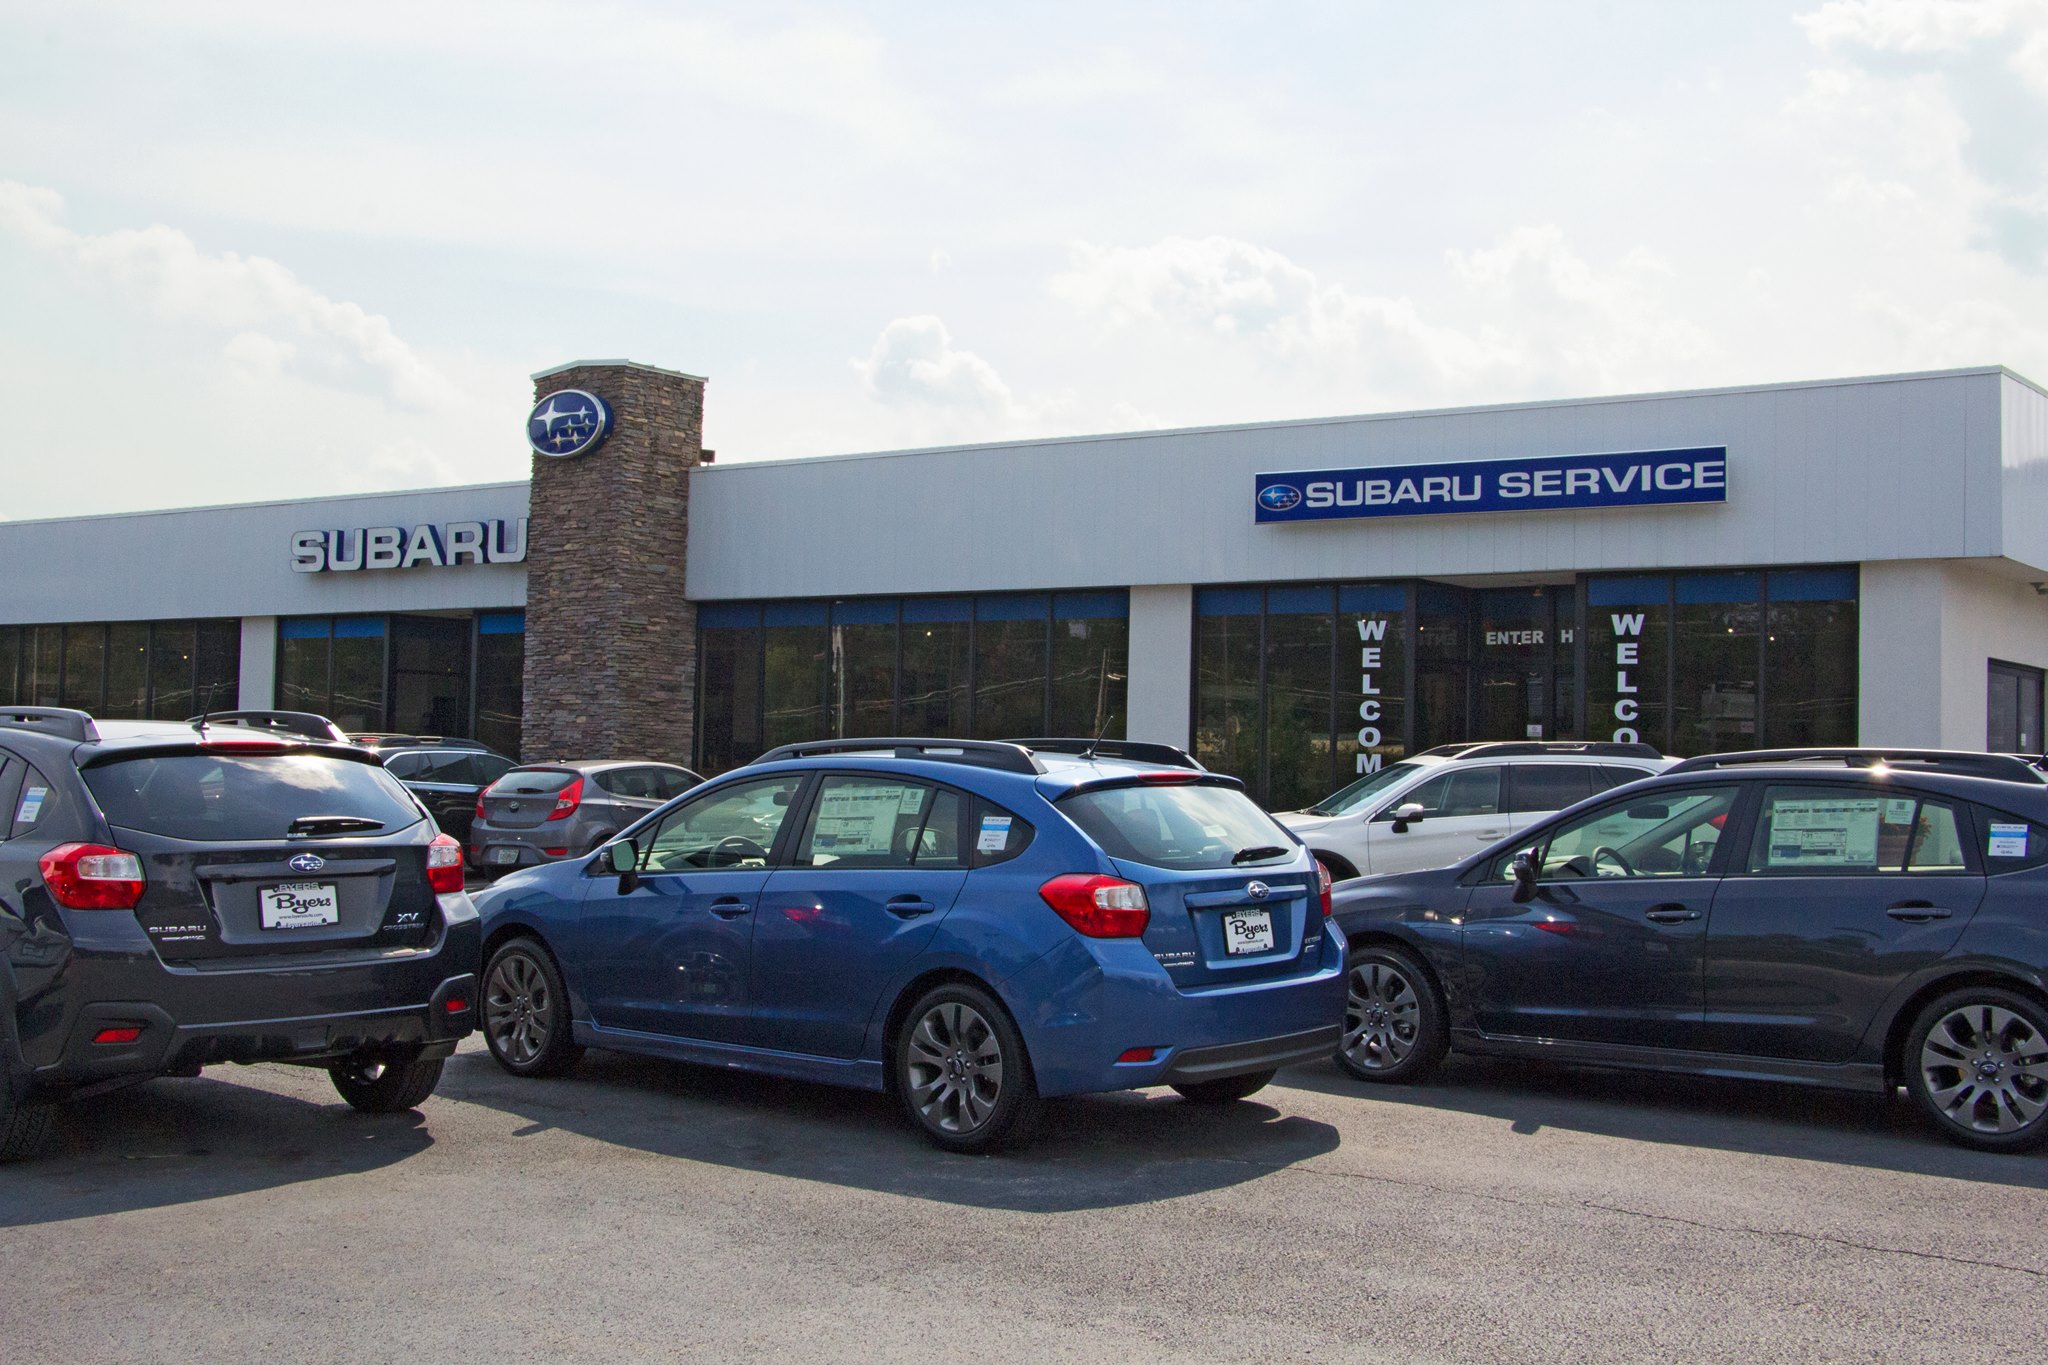 Visit Byers Airport Subaru for a new vehicle or service in Columbus OH